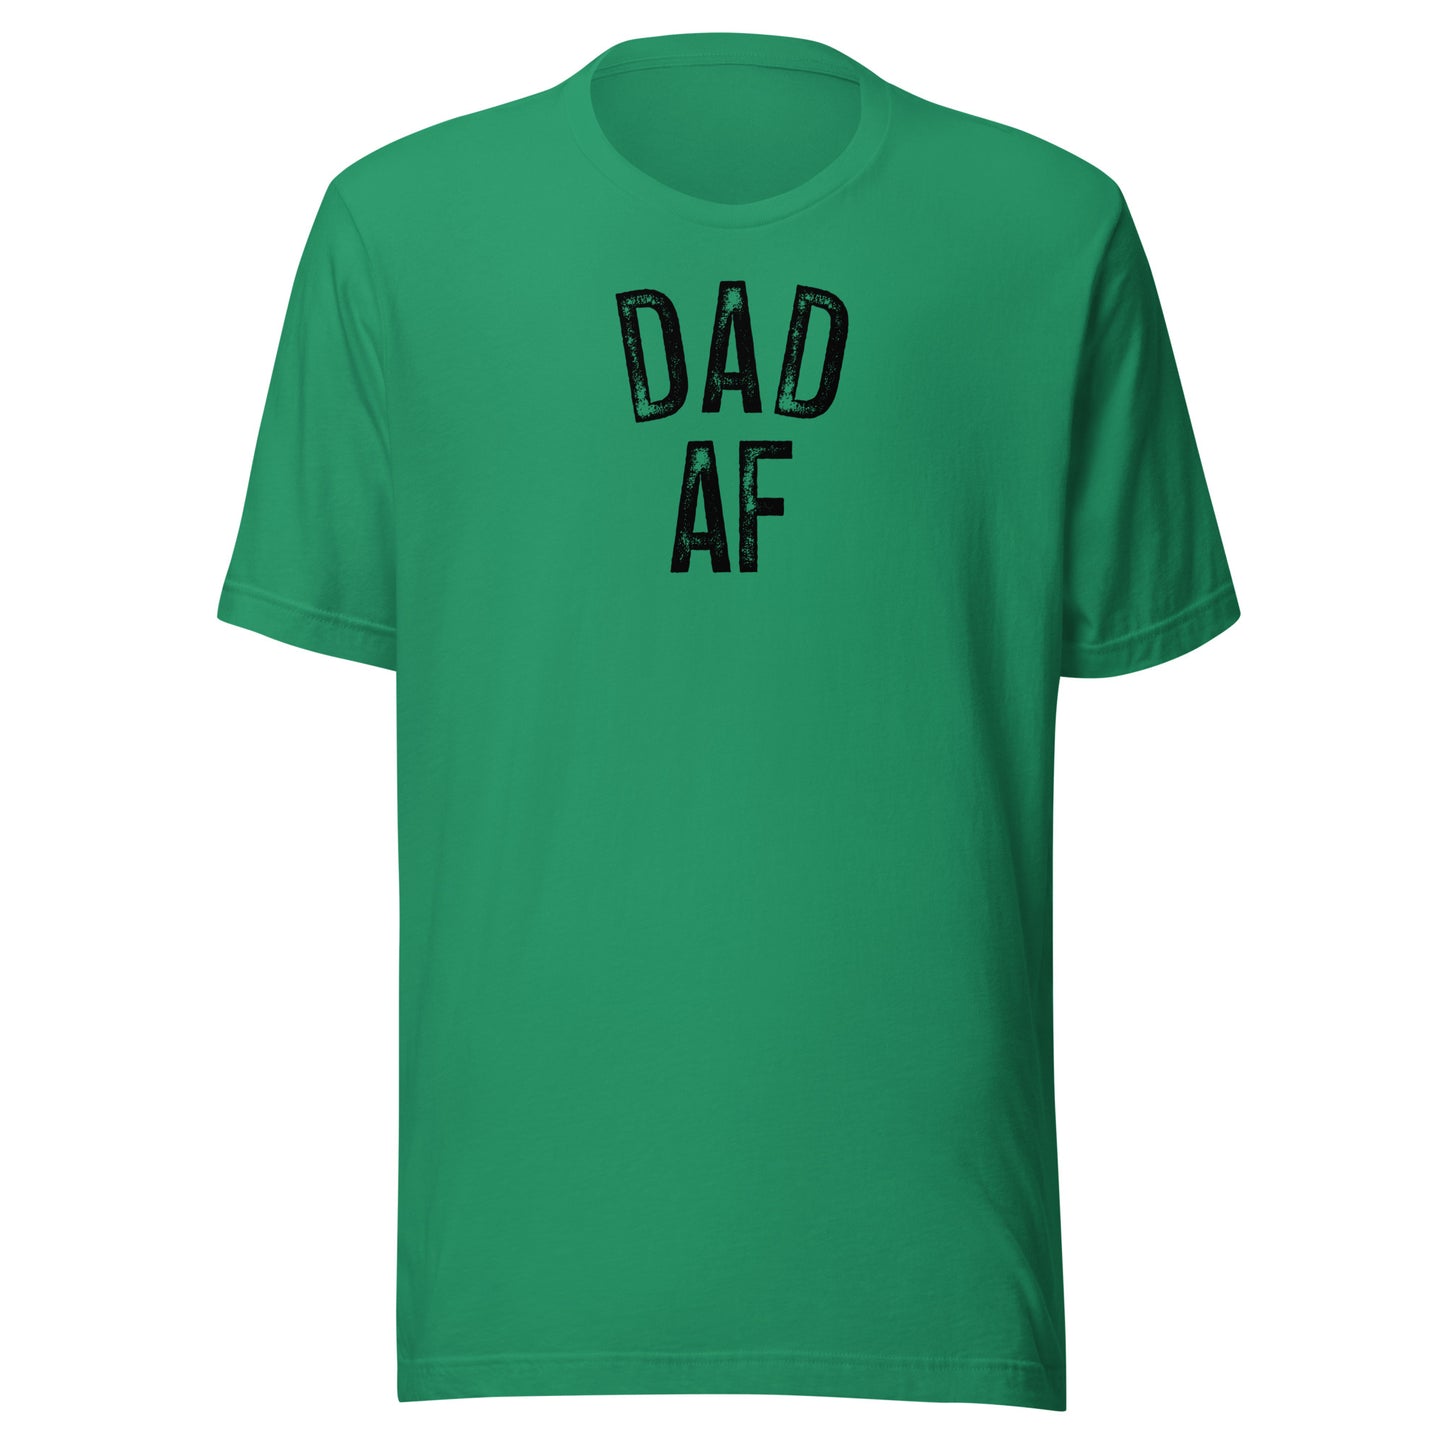 DAD AF T-Shirts with Style and Swagger!